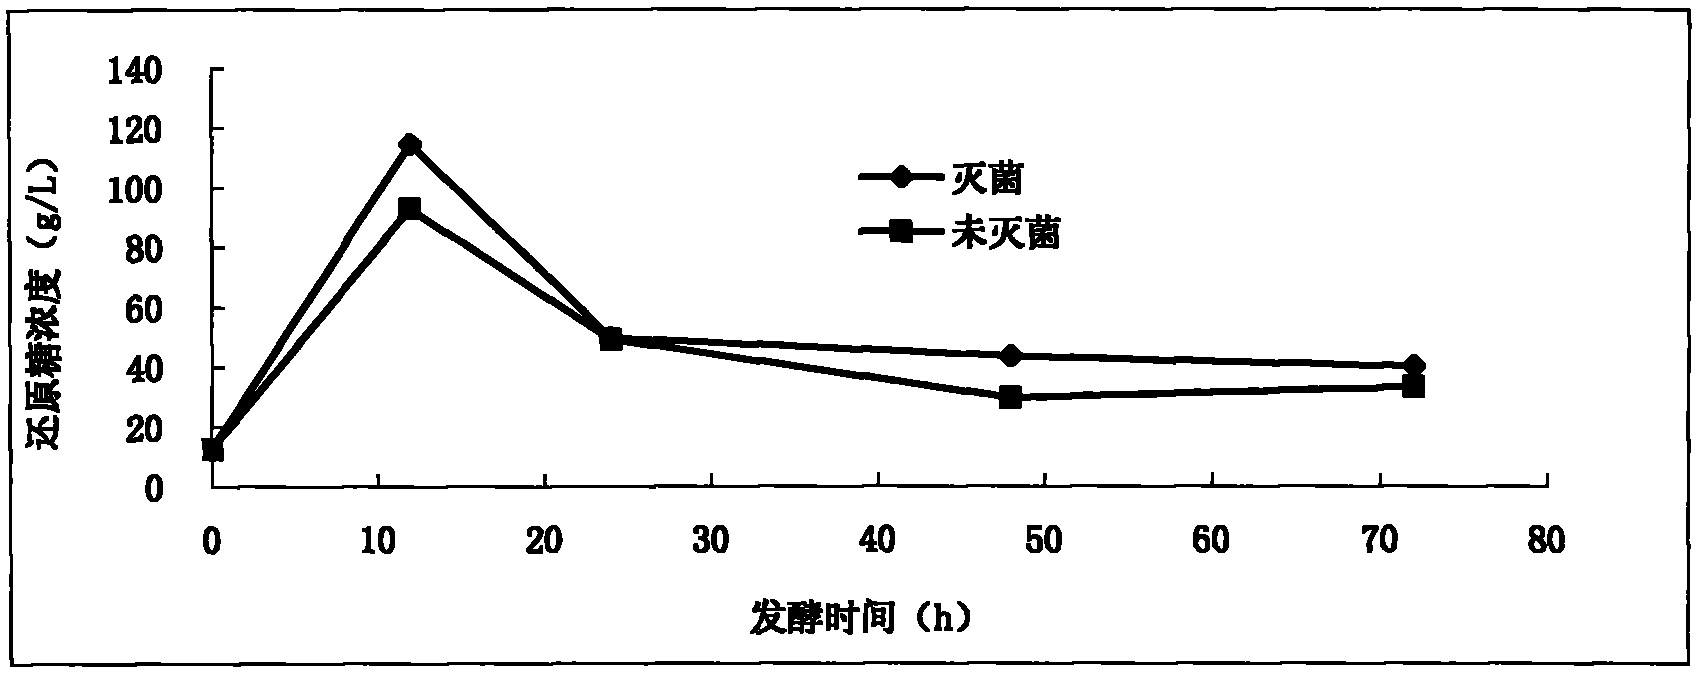 Method for producing fuel ethanol by utilizing papermaking sludge